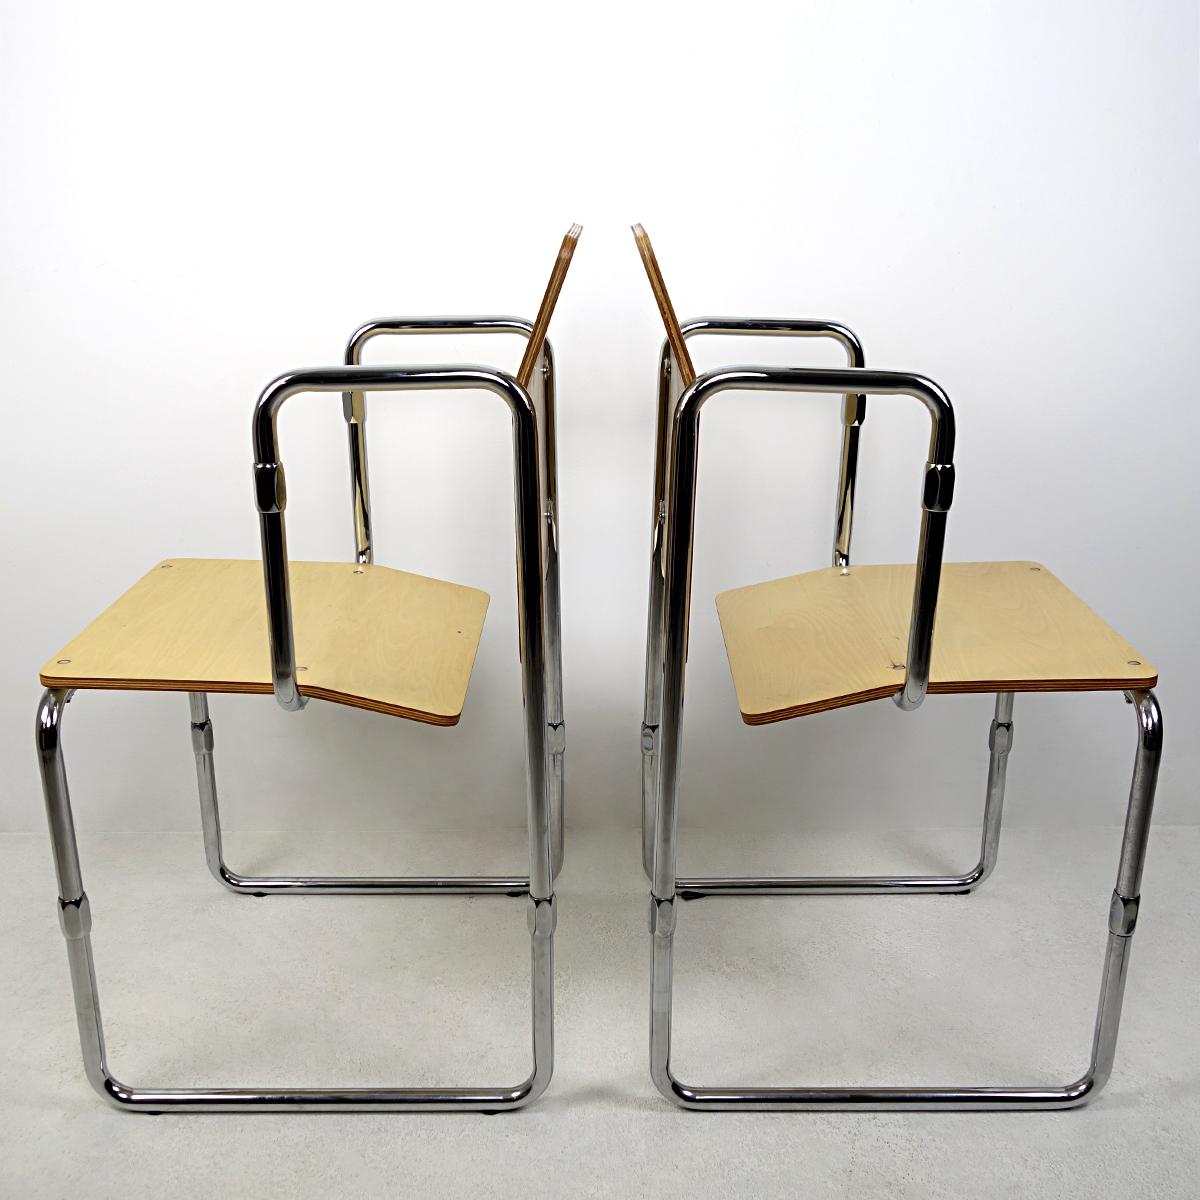 Modernist Hopmi Chair by Gerrit Rietveld Limited Edition Official Reproduction 6